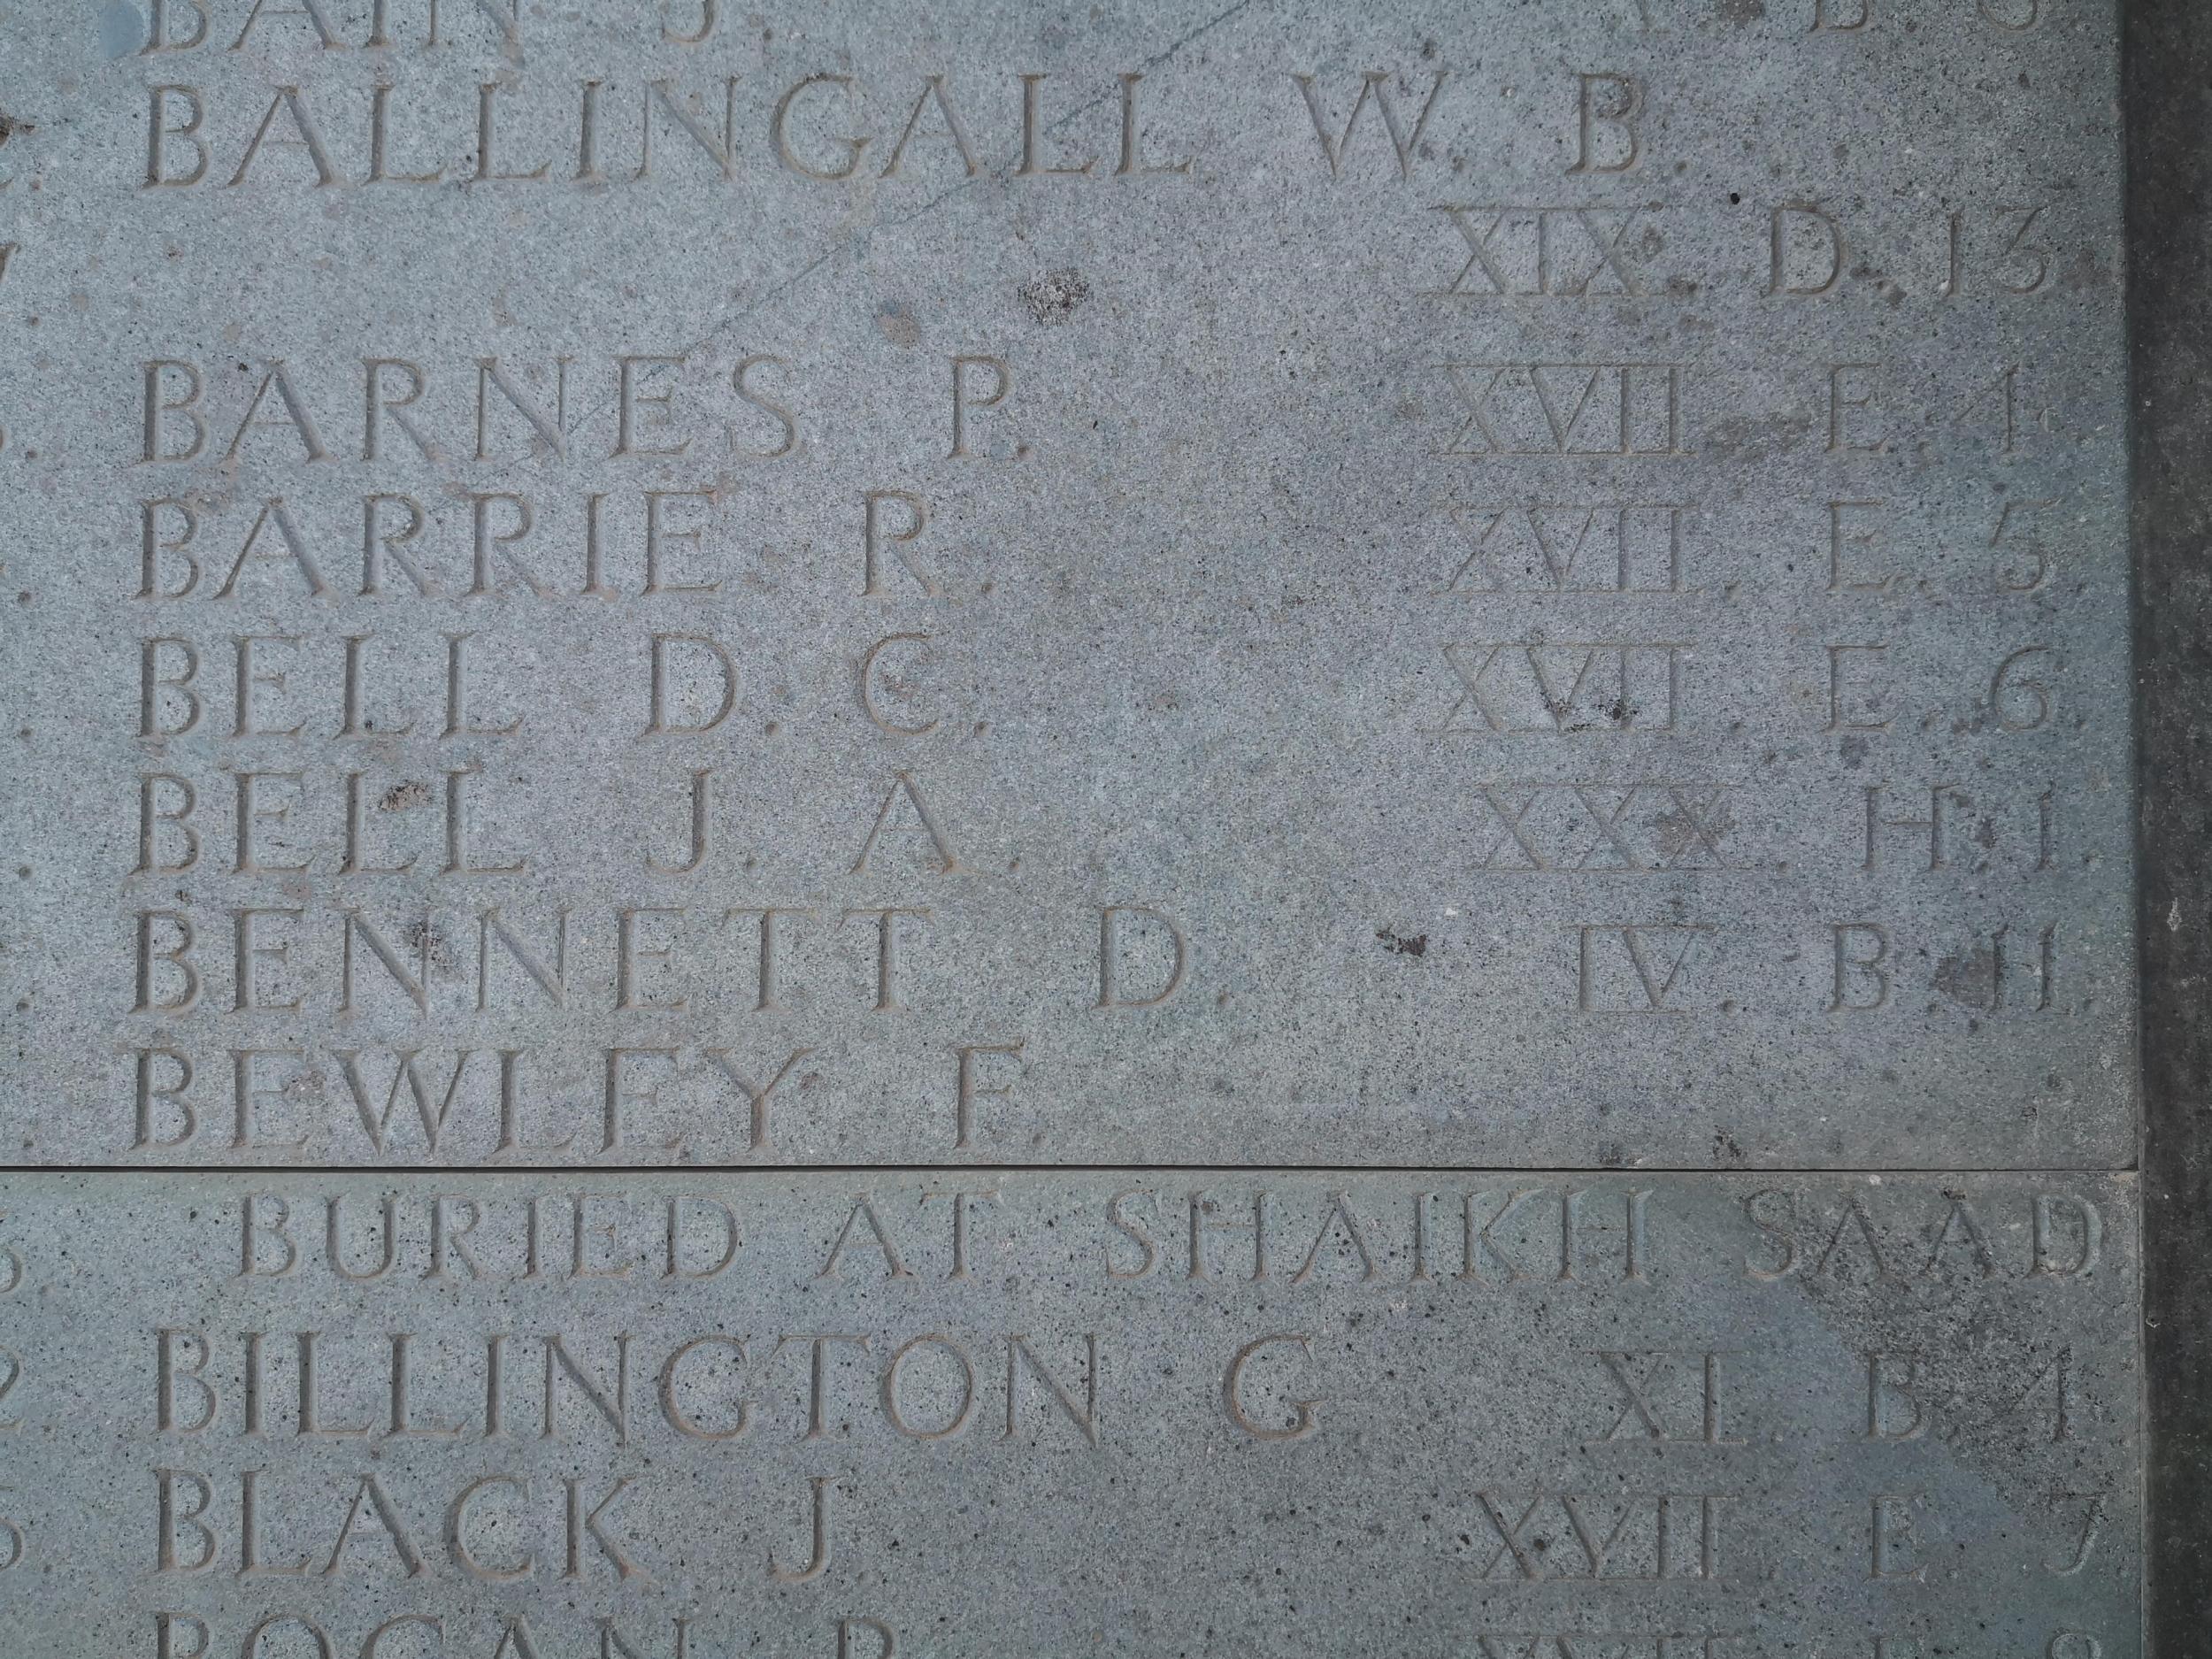 His name still carved in stone: ‘D C Bell’ on the wall of Amara cemetery under the badge of the Black Watch